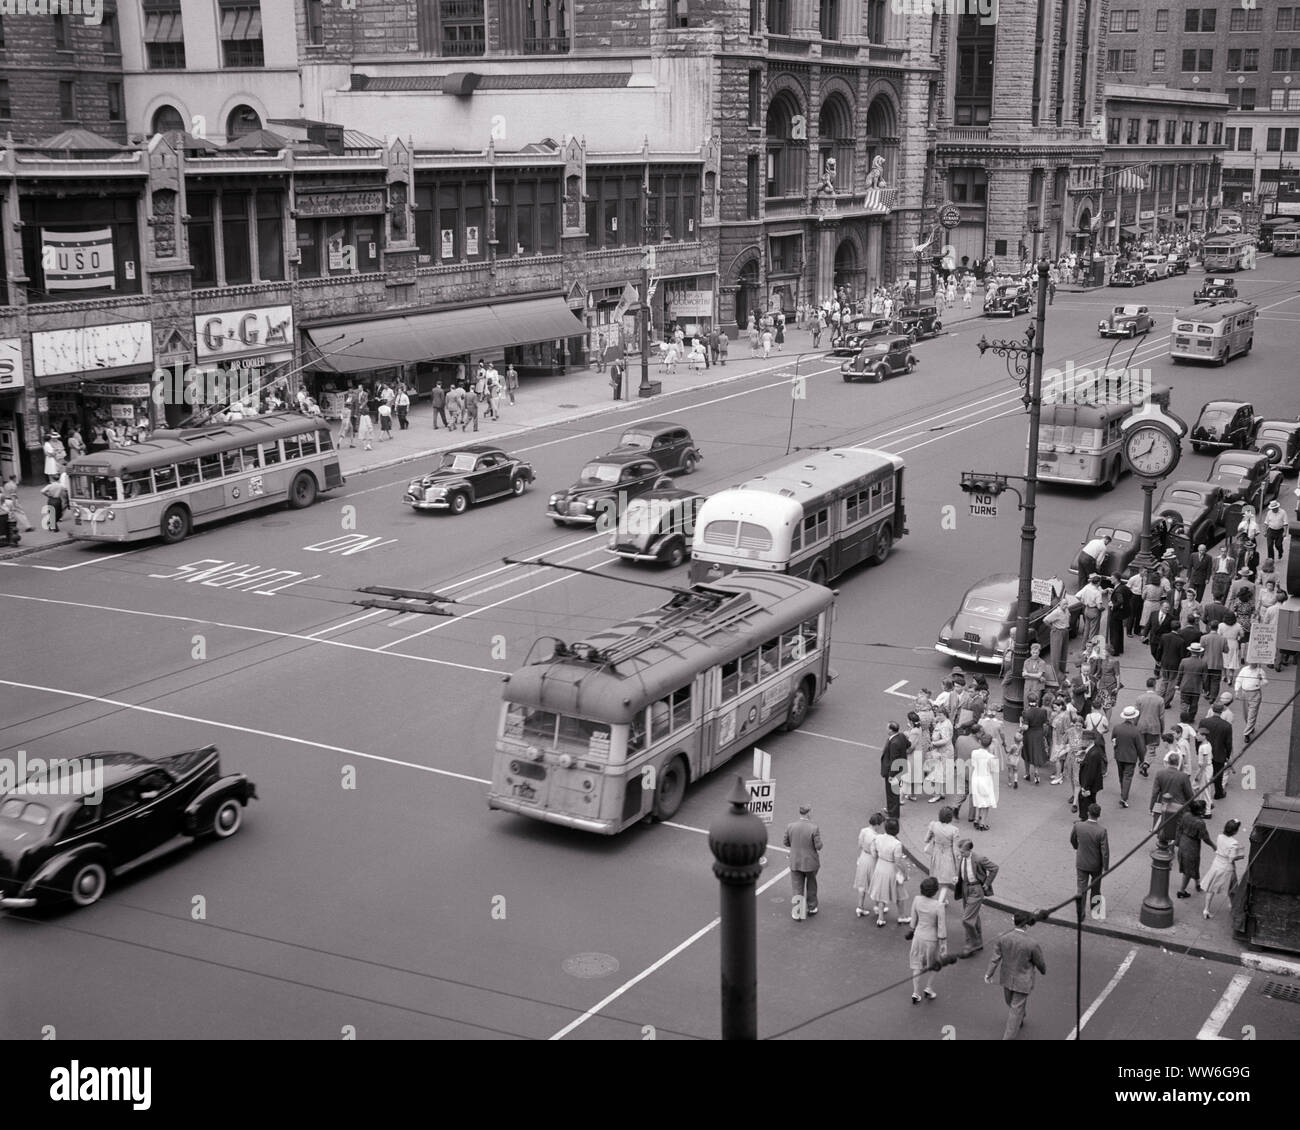 1940s BROAD STREET & MARKET INTERSECTION BUSES CARS PEDESTRIANS DOWNTOWN NEWARK NEW JERSEY USA - q42250 CPC001 HARS B&W NORTH AMERICA DOWNTOWN NORTH AMERICAN HIGH ANGLE INTERSECTION AUTOS PROGRESS BROAD NJ STORES TROLLEY NEWARK AUTOMOBILES TROLLEYS VEHICLES NEW JERSEY TRACKLESS TROLLEY BUSES COMMERCE ELECTRIC BUS STREET SCENE STREETCARS TROLLEY BUS BLACK AND WHITE BUSINESSES CITYSCAPE OLD FASHIONED PUBLIC TRANSPORTATION STREETCAR THOROUGHFARE TRAM TROLLEY CAR Stock Photo